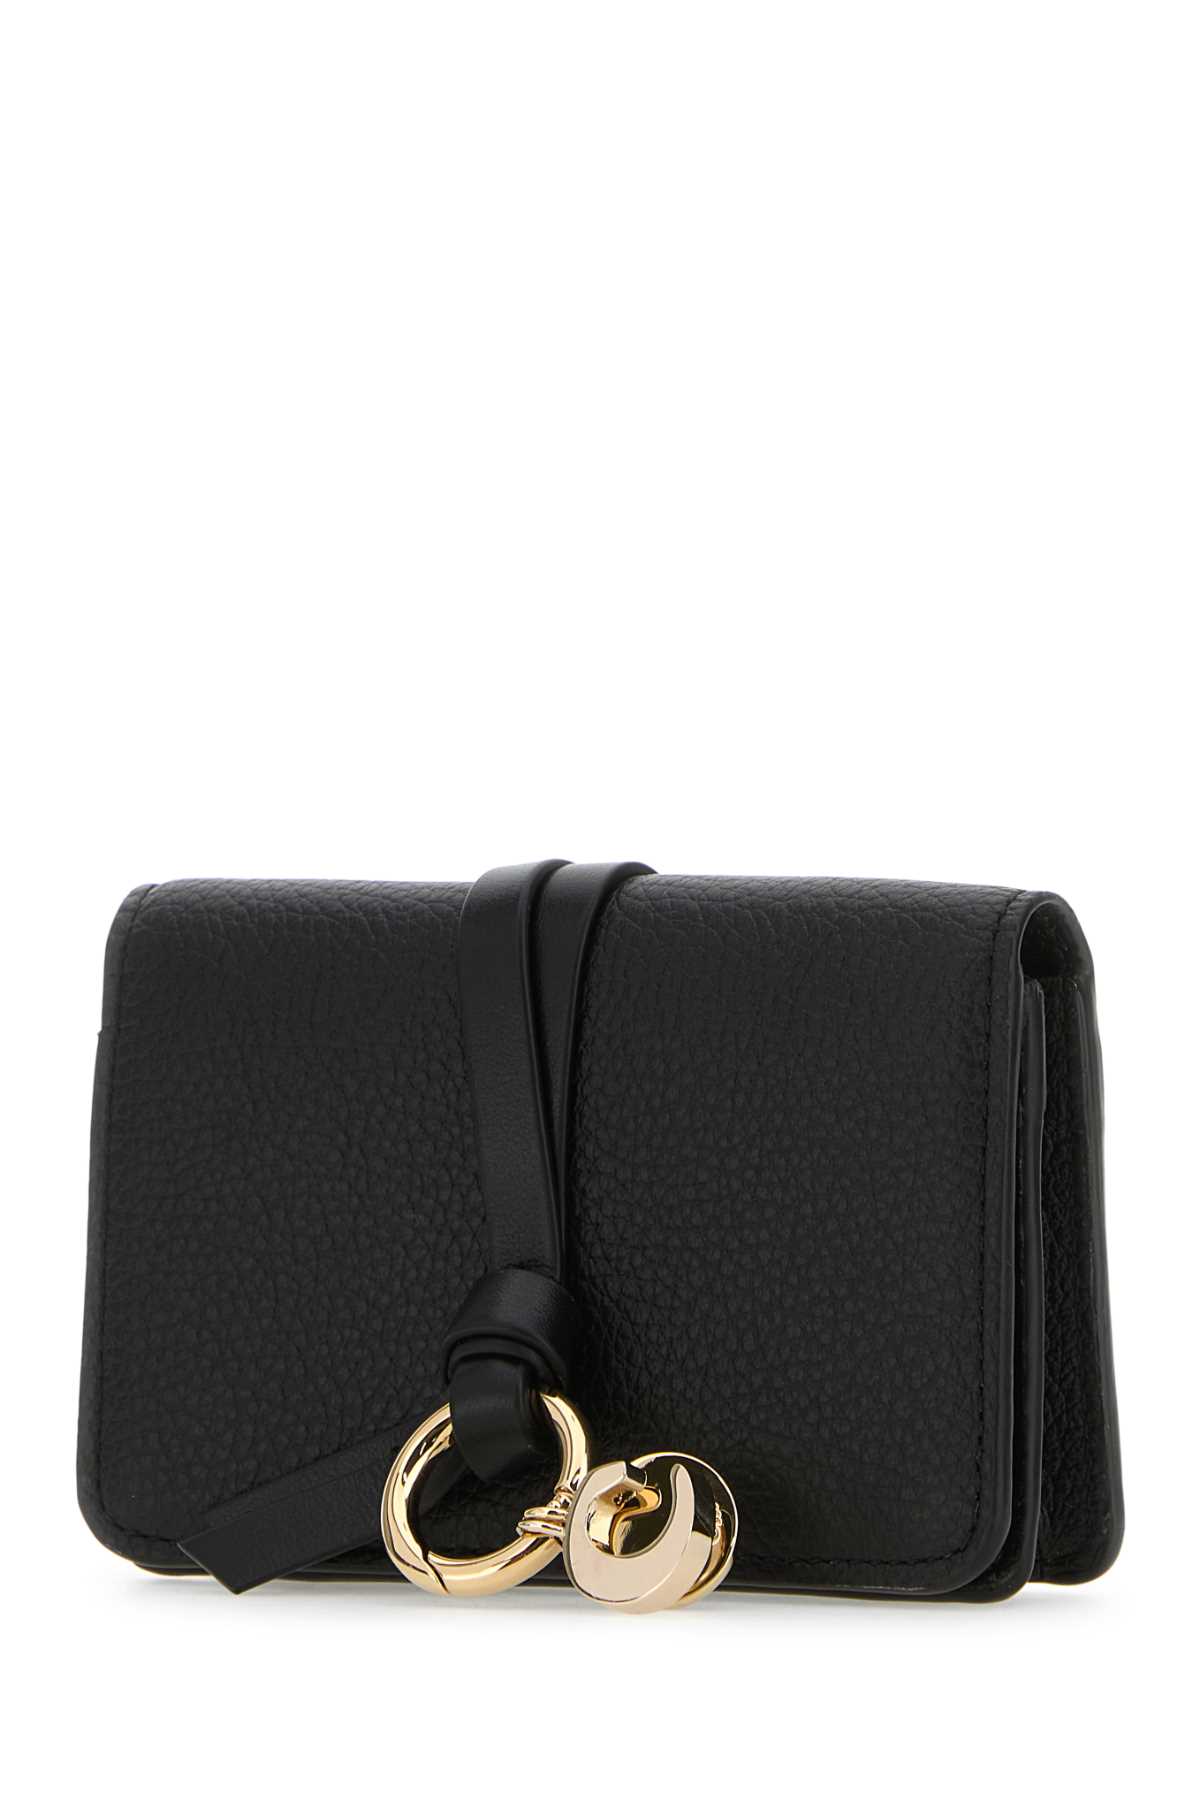 Chloé Black Leather Wallet In 001